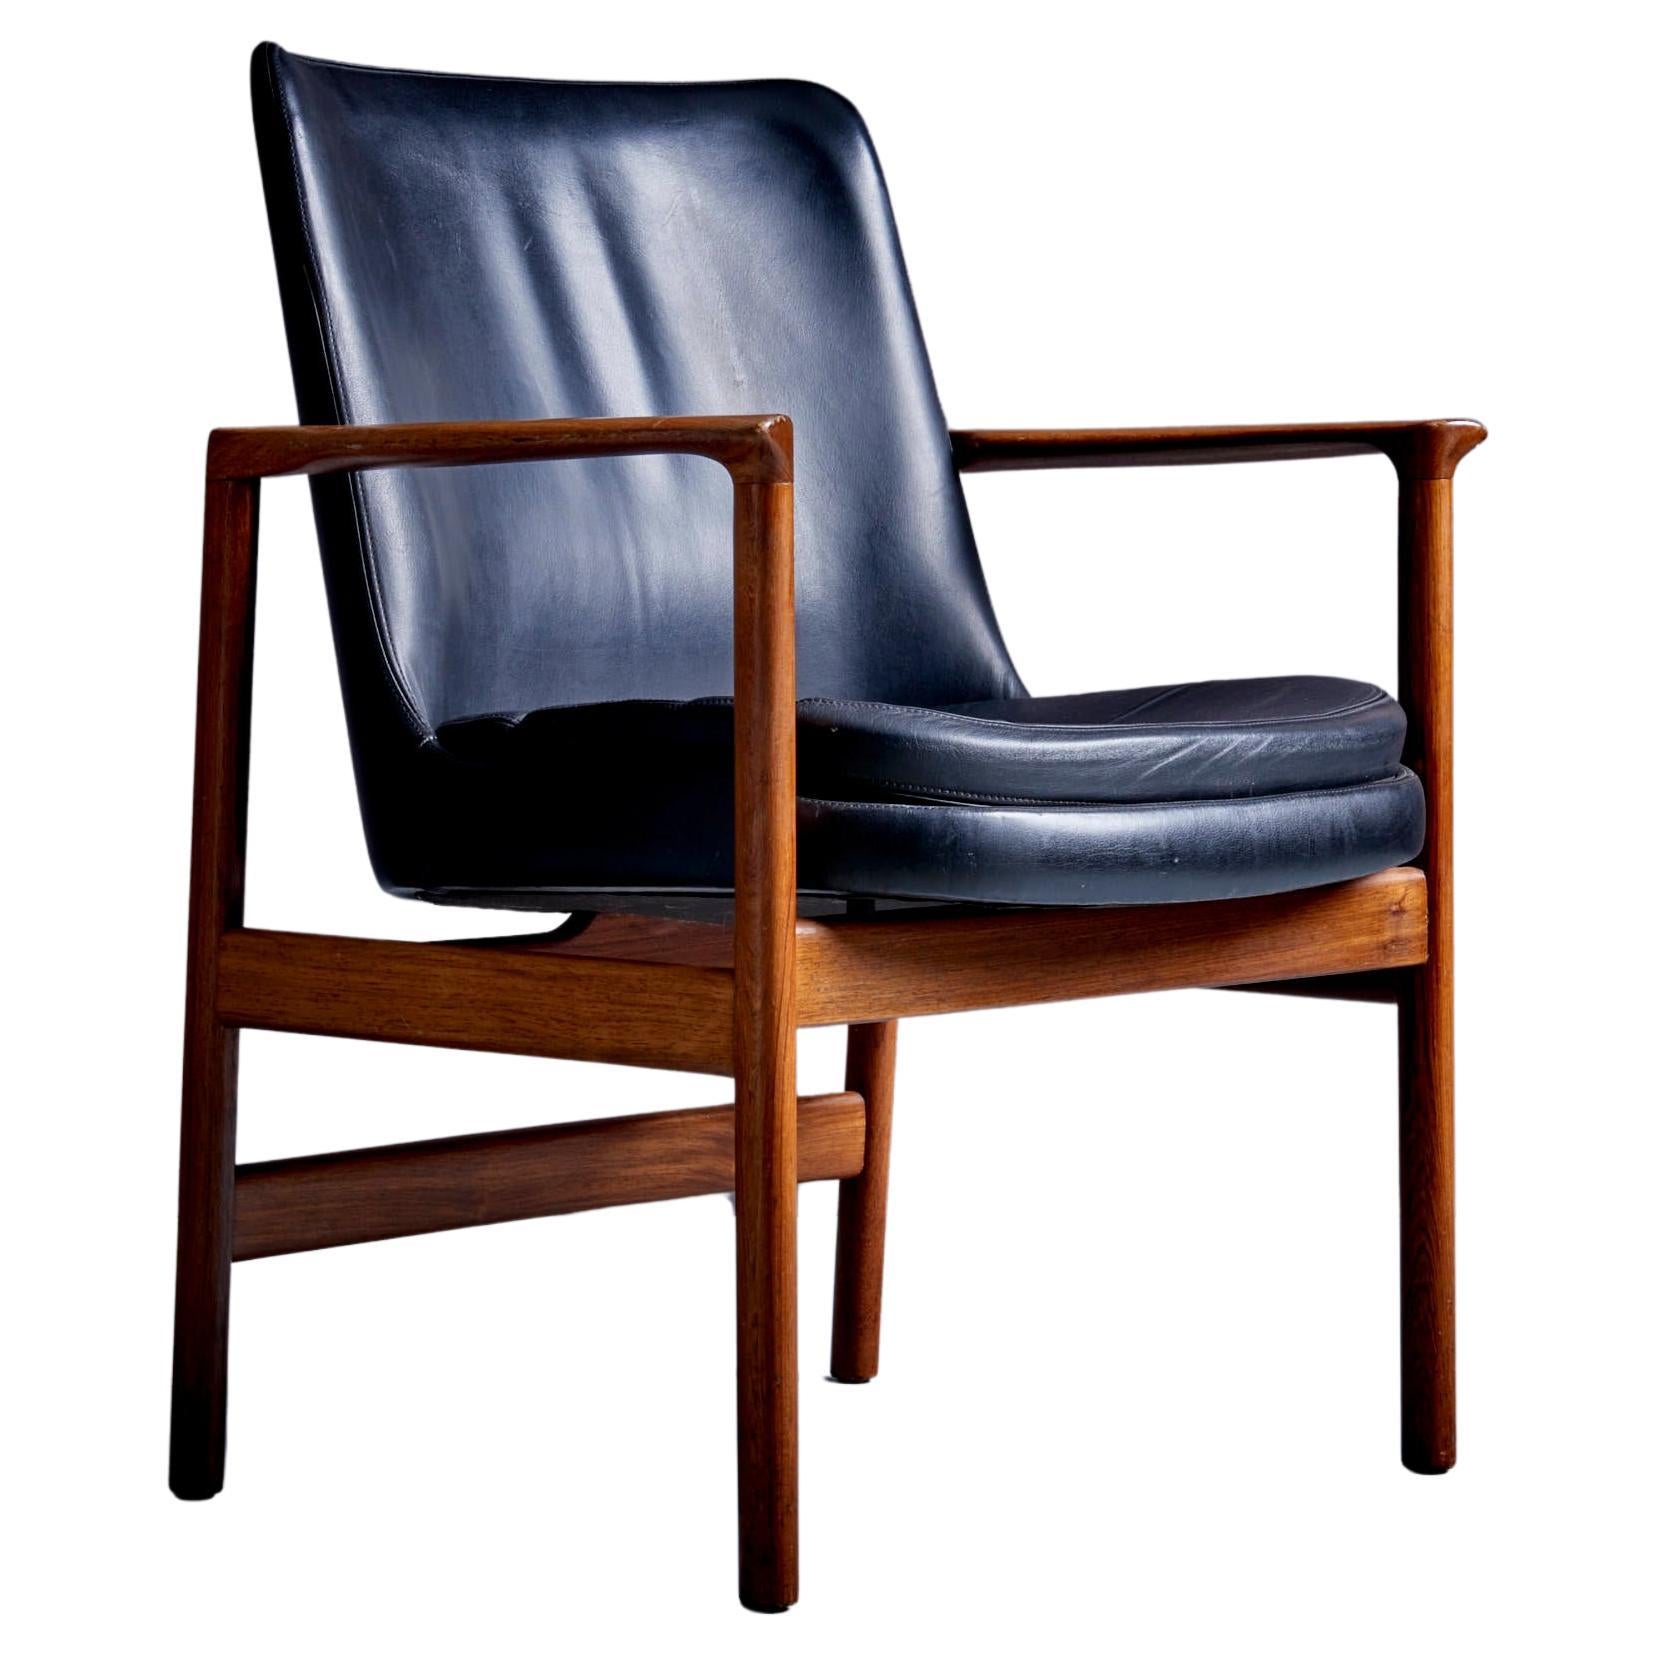 Ib Kofod-Larsen Arm or Easy Chair for Fröscher Sitform, Germany 1960s